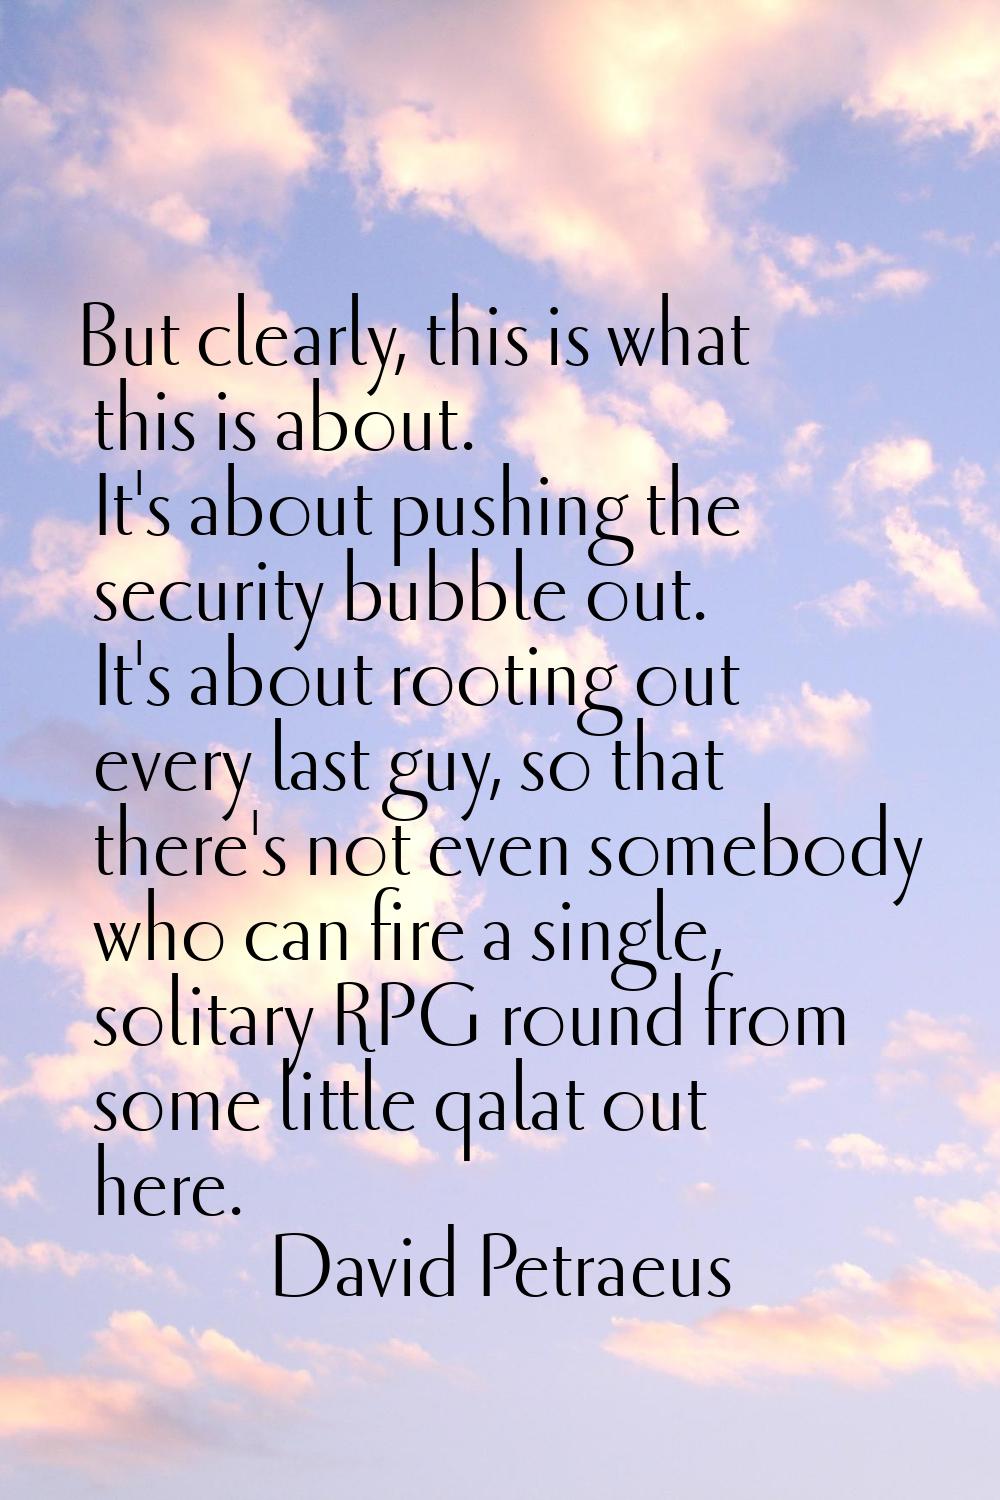 But clearly, this is what this is about. It's about pushing the security bubble out. It's about roo